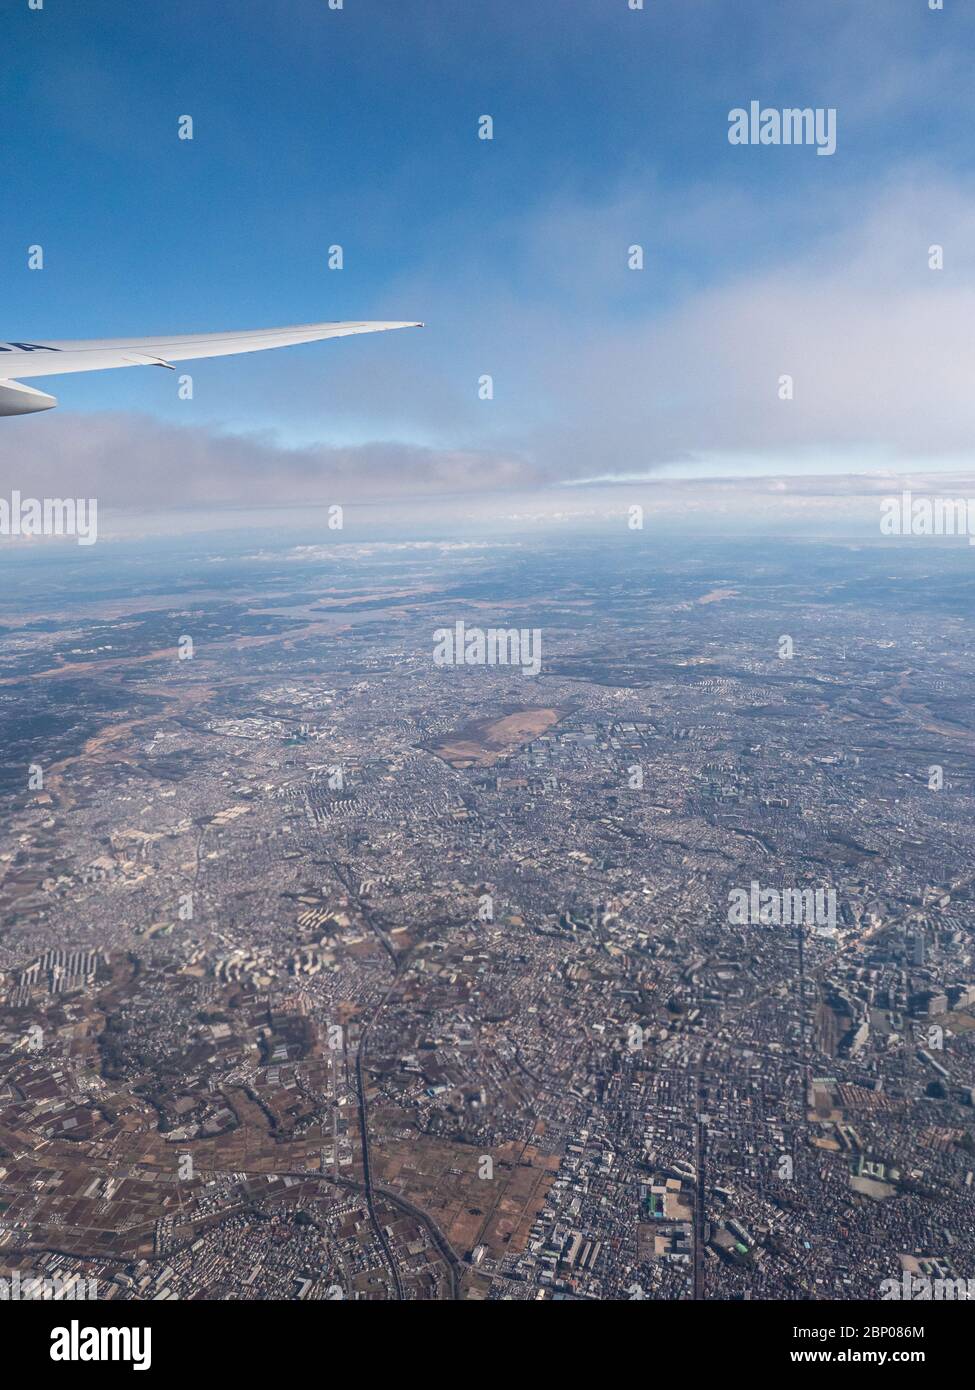 A distant city seen from an aeroplanes window. Stock Photo